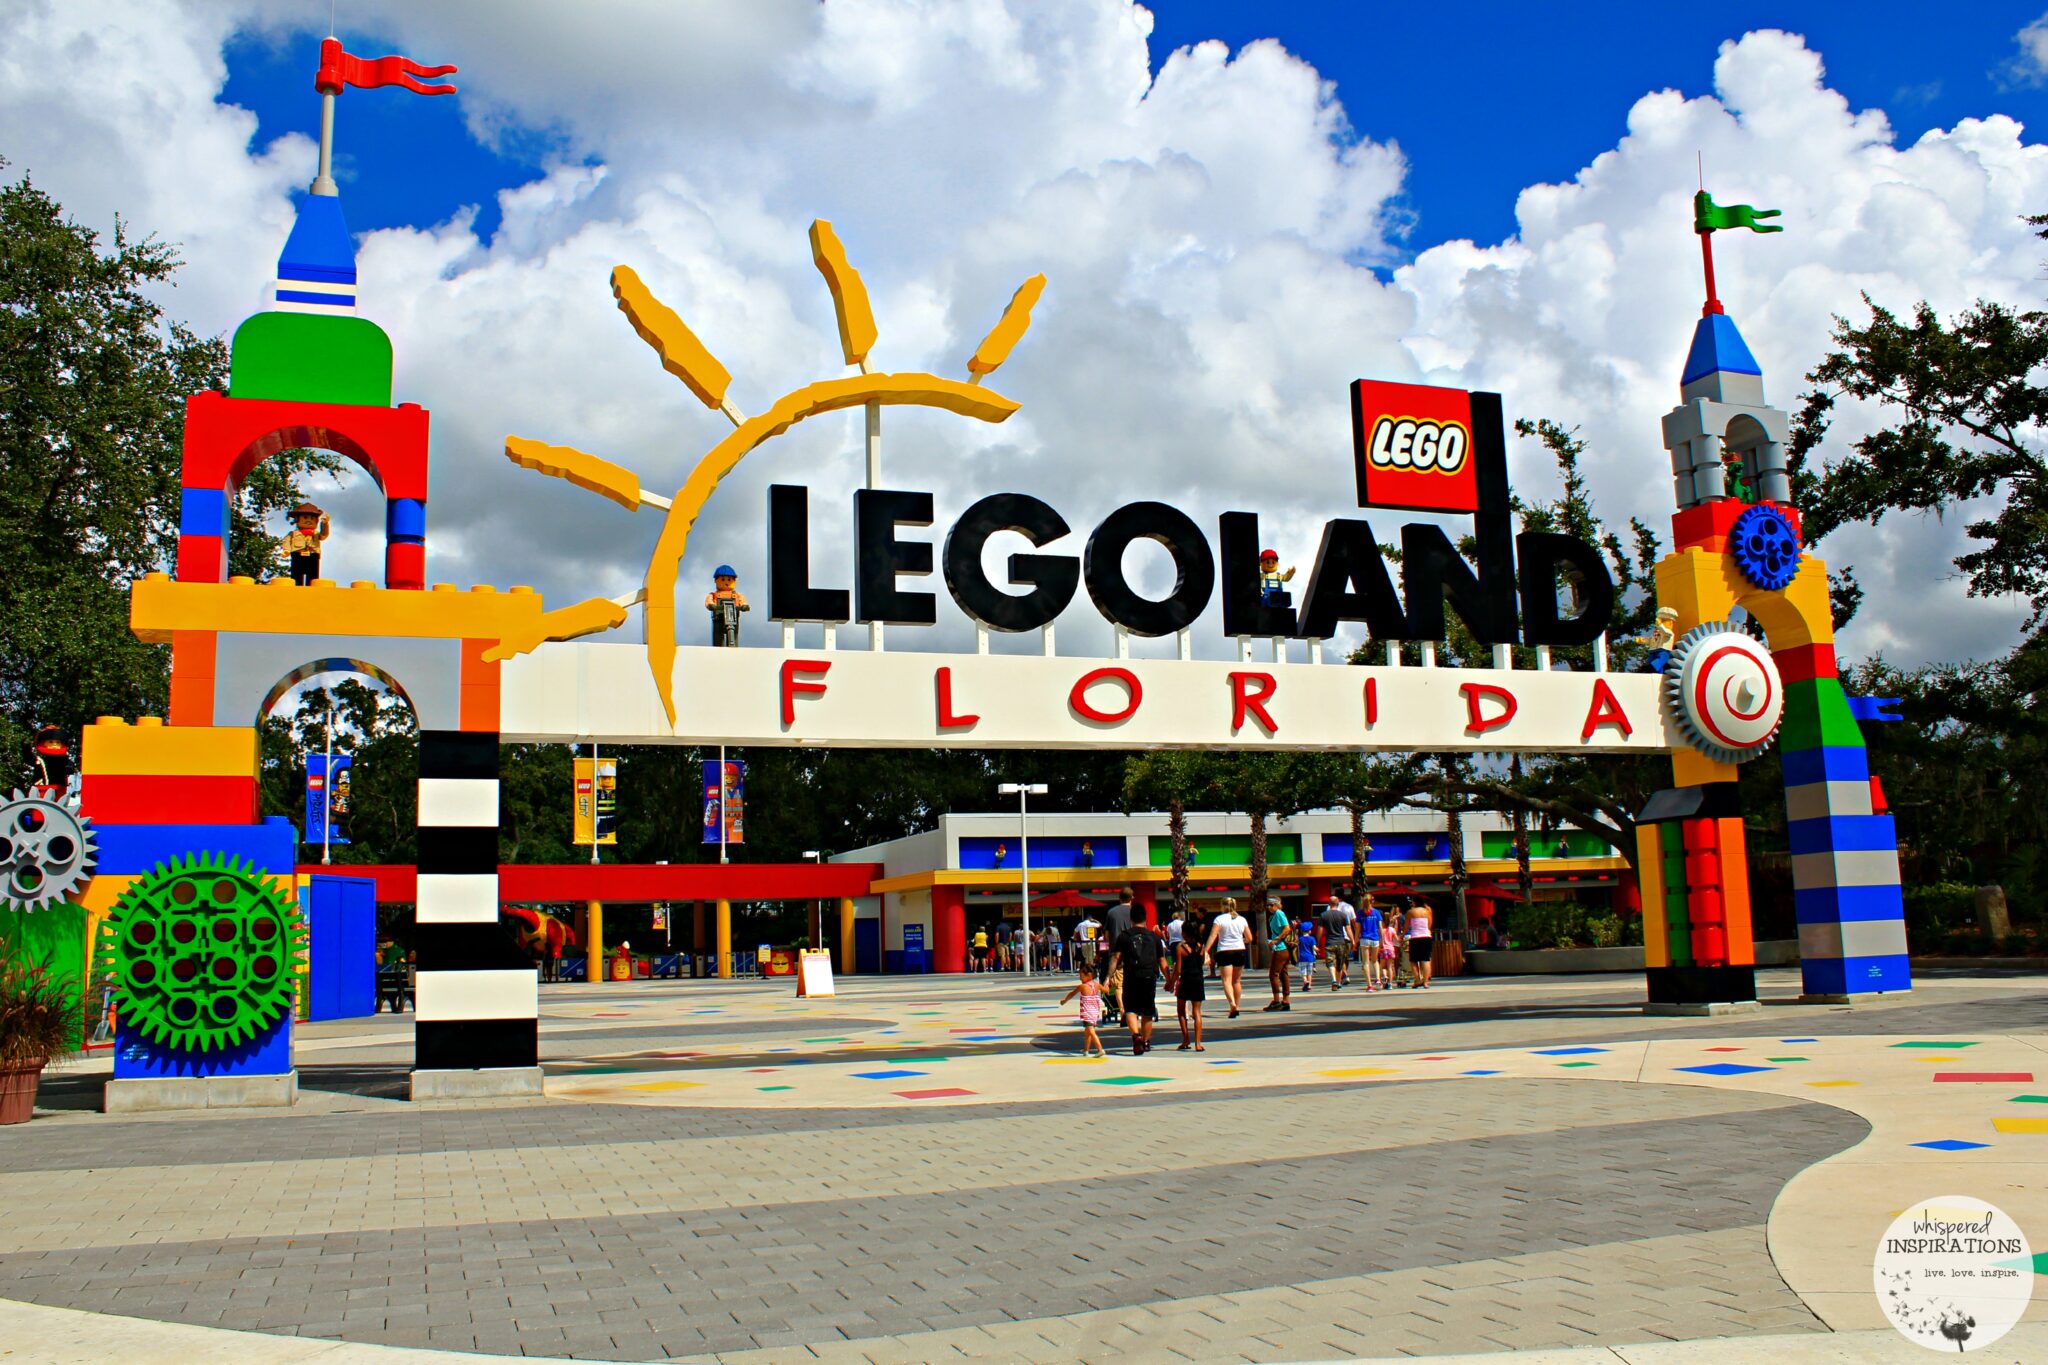 LEGOLAND Florida: LEGO Adventures in The Sunny State at A Great Price with KGSTickets.com! #KGSTickets